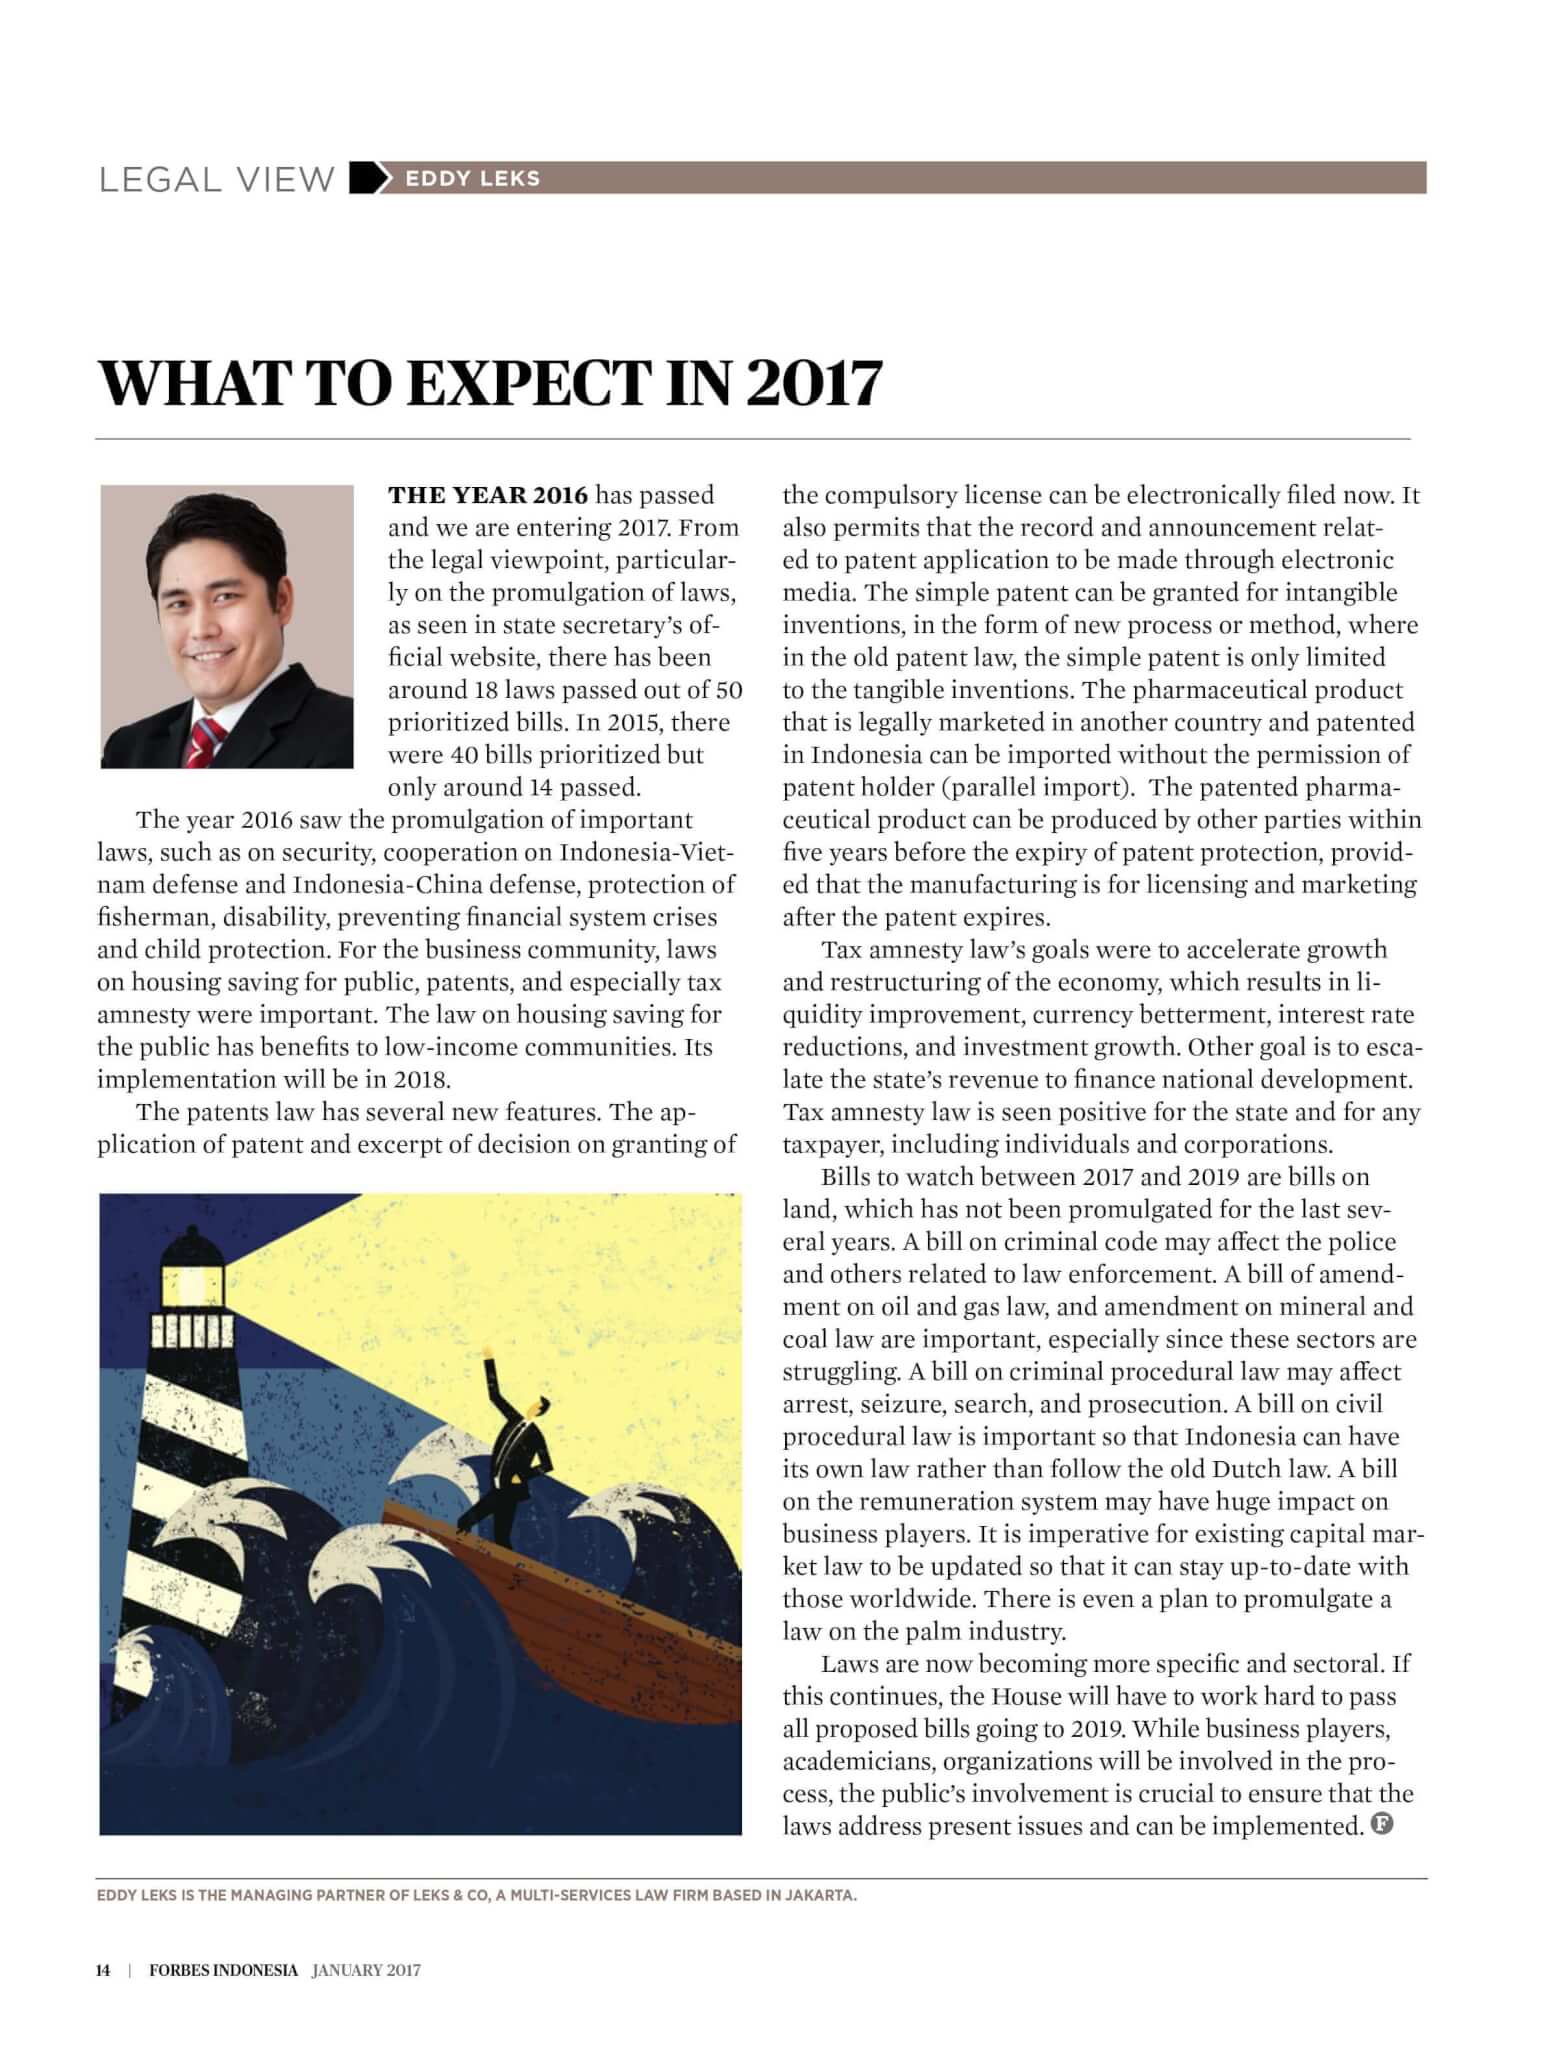 2017.01.05 Article of Eddy Leks on Forbes Indonesia - January 2017